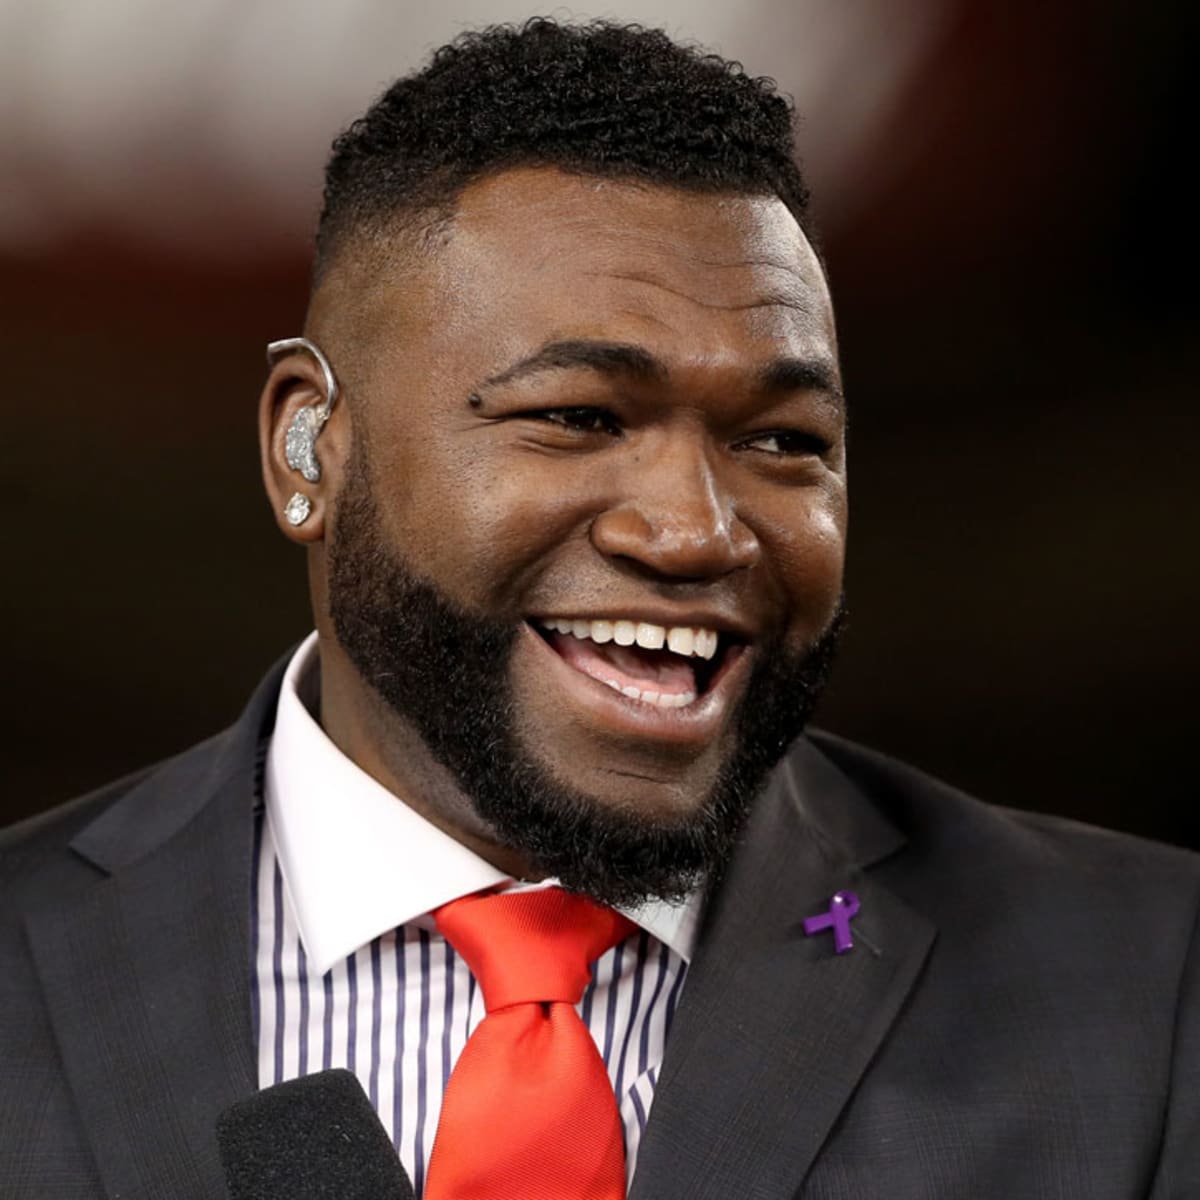 David Ortiz Released from Hospital Weeks After Dominican Republic